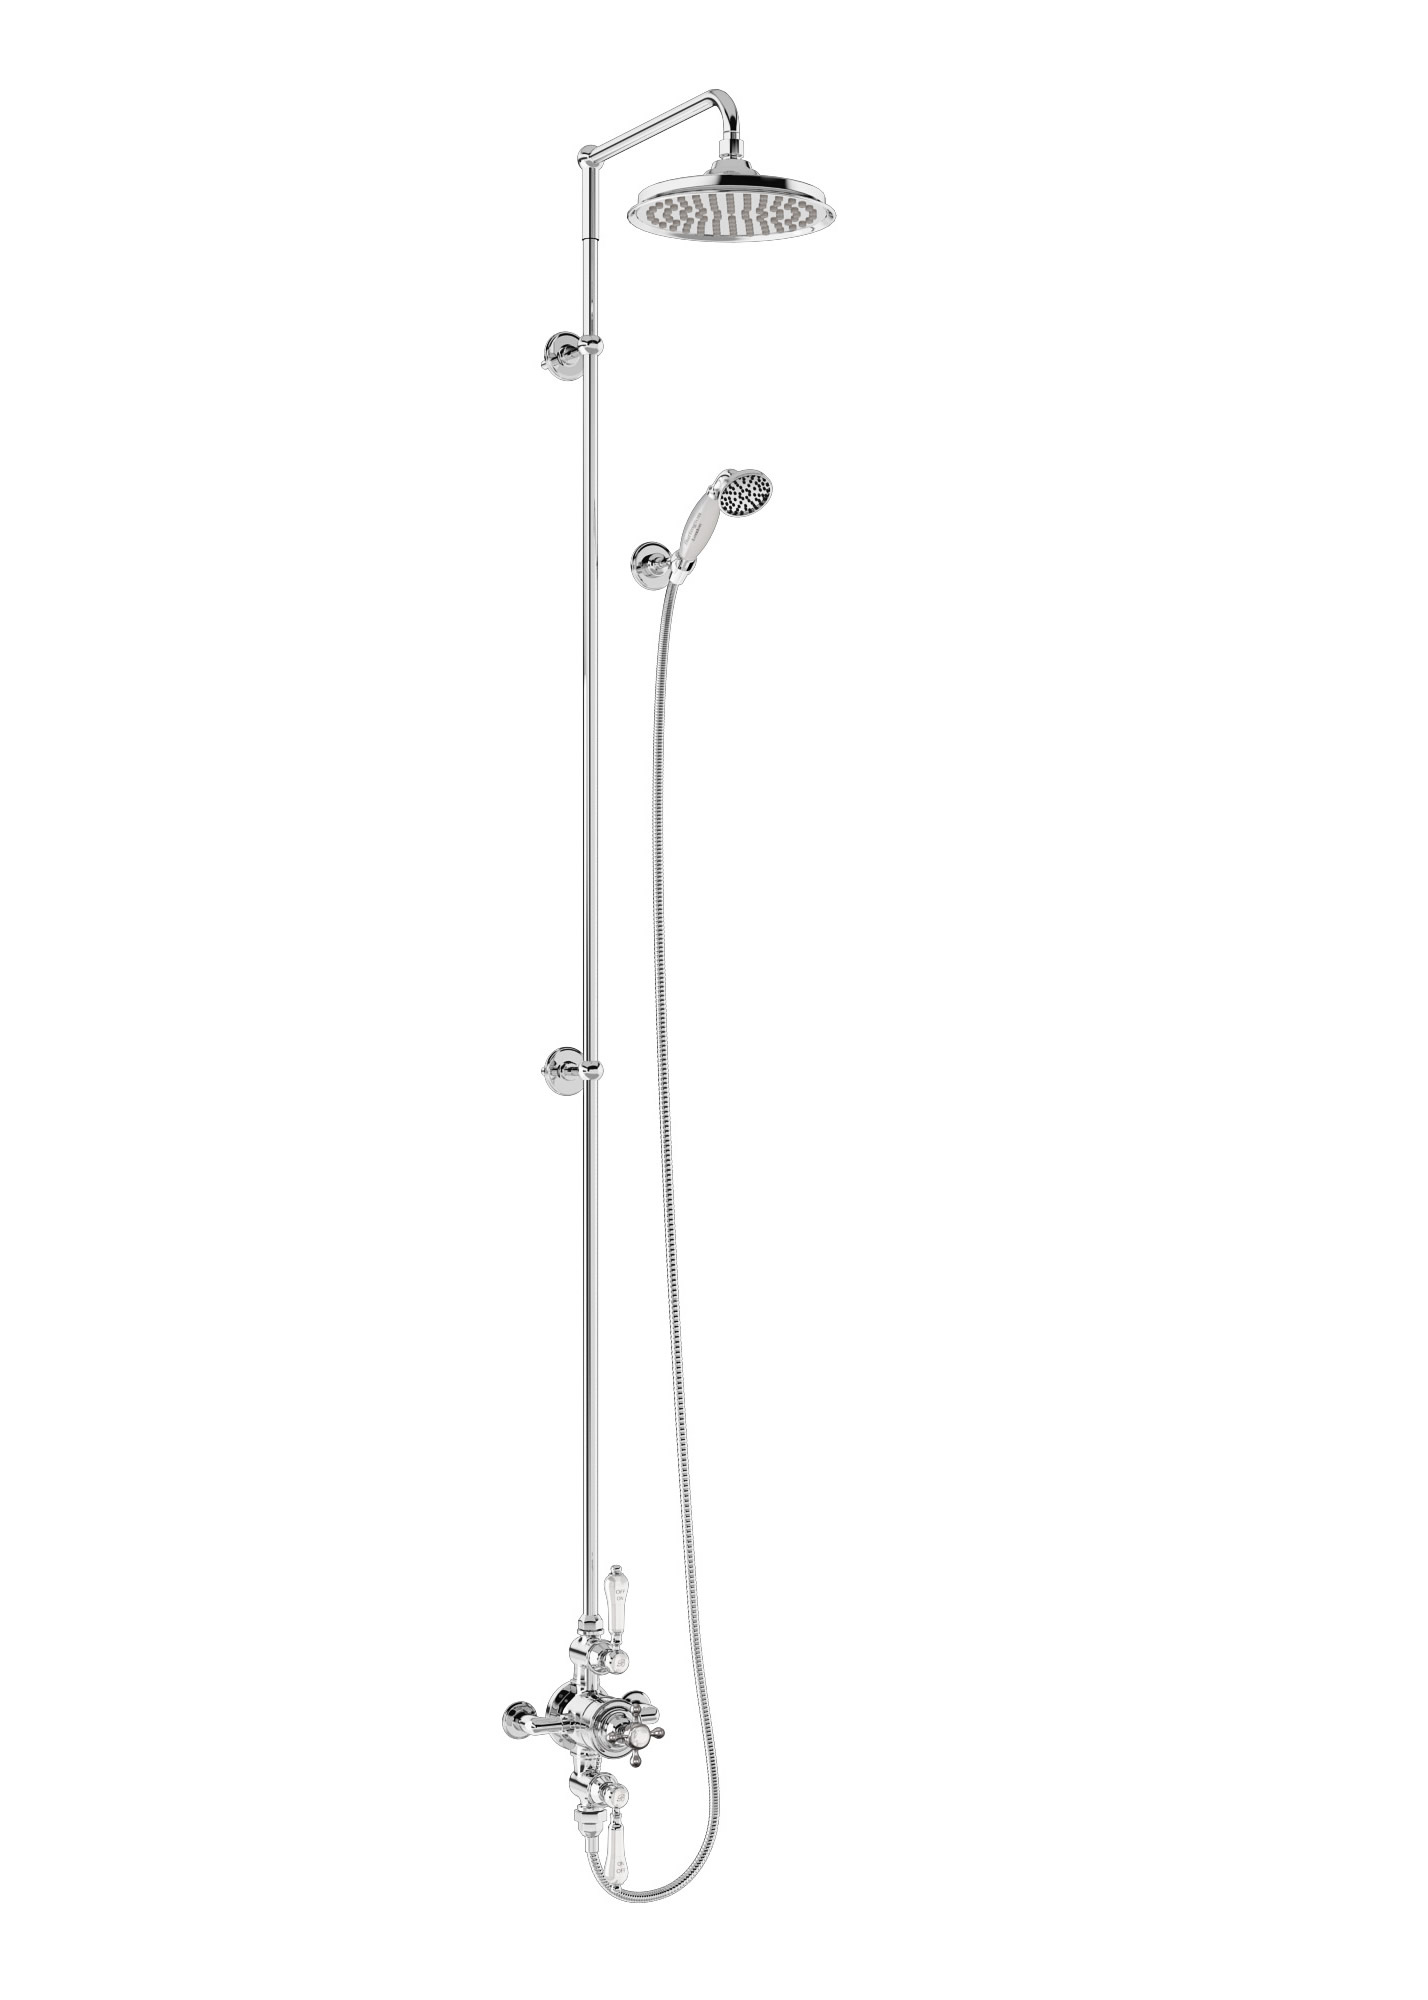 Avon Medici Thermostatic Exposed Shower Valve Two Outlet,Extended Rigid Riser, Swivel Shower Arm, Handset & Holder with Hose with 12 inch rose 